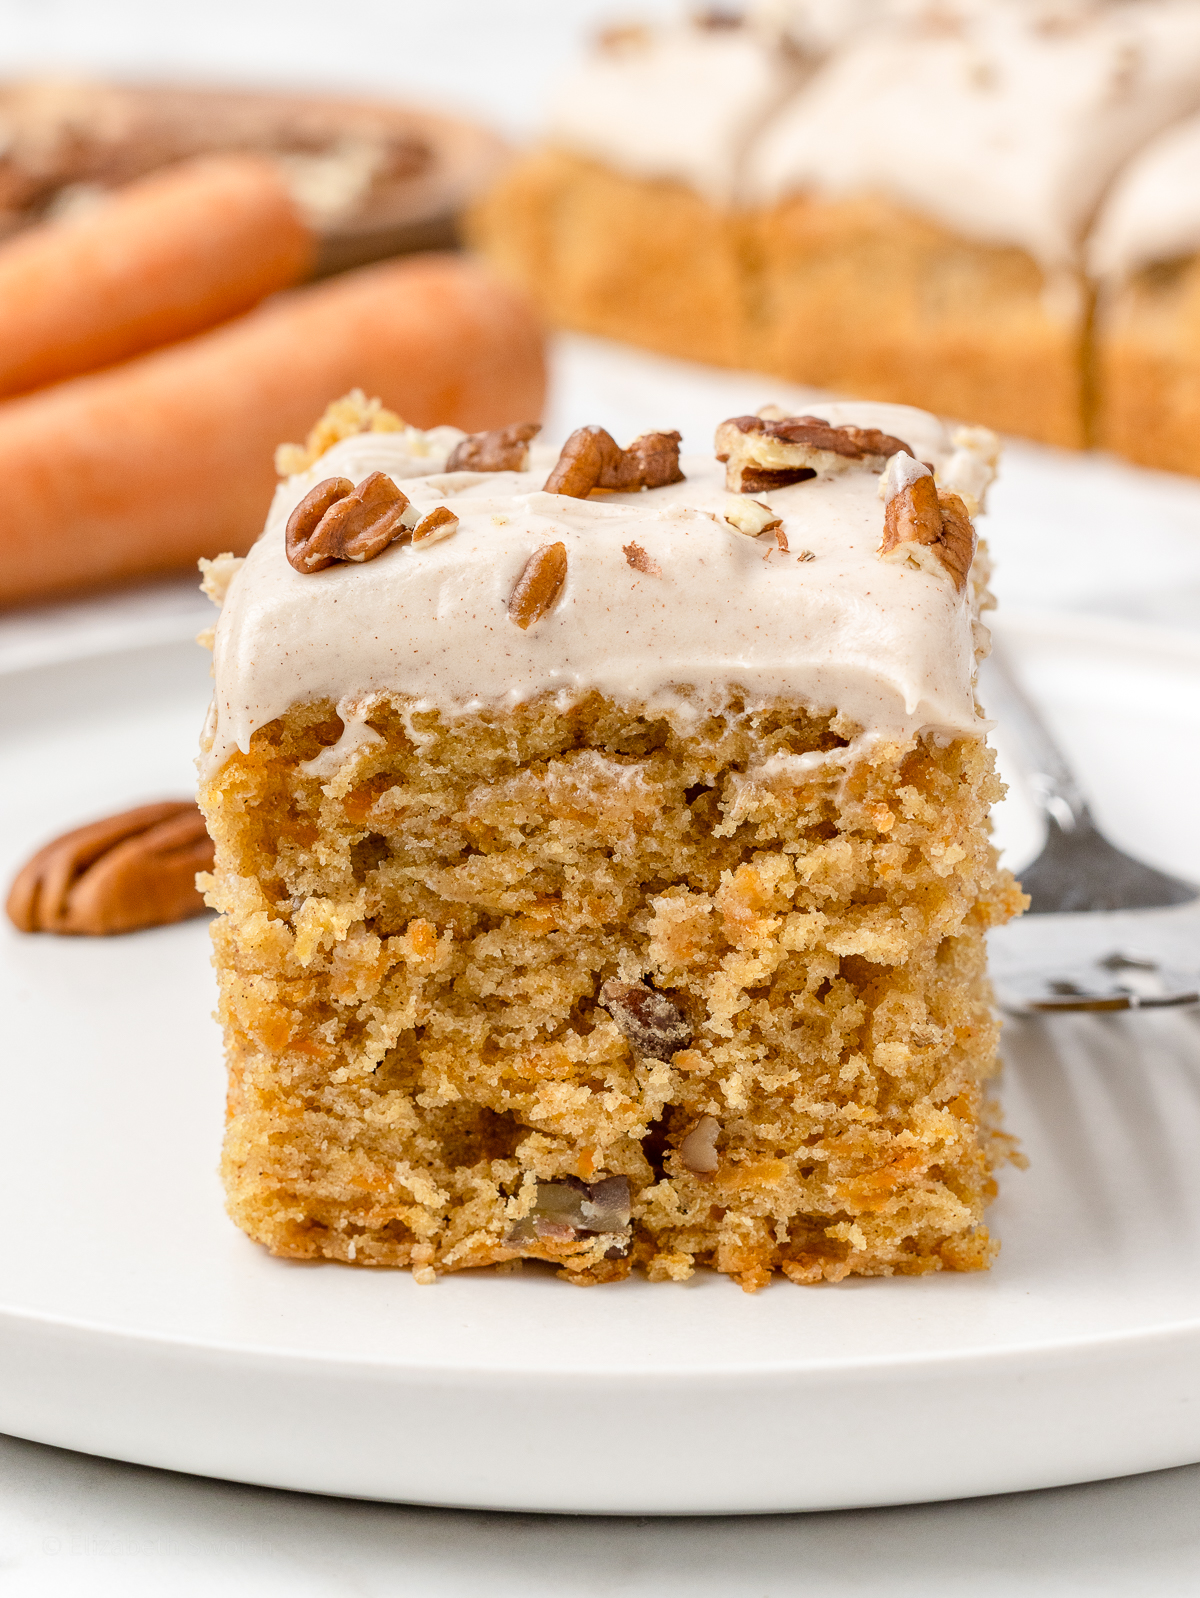 A slice of carrot snack cake on a plate with a fork on the side. It is ready to eat.